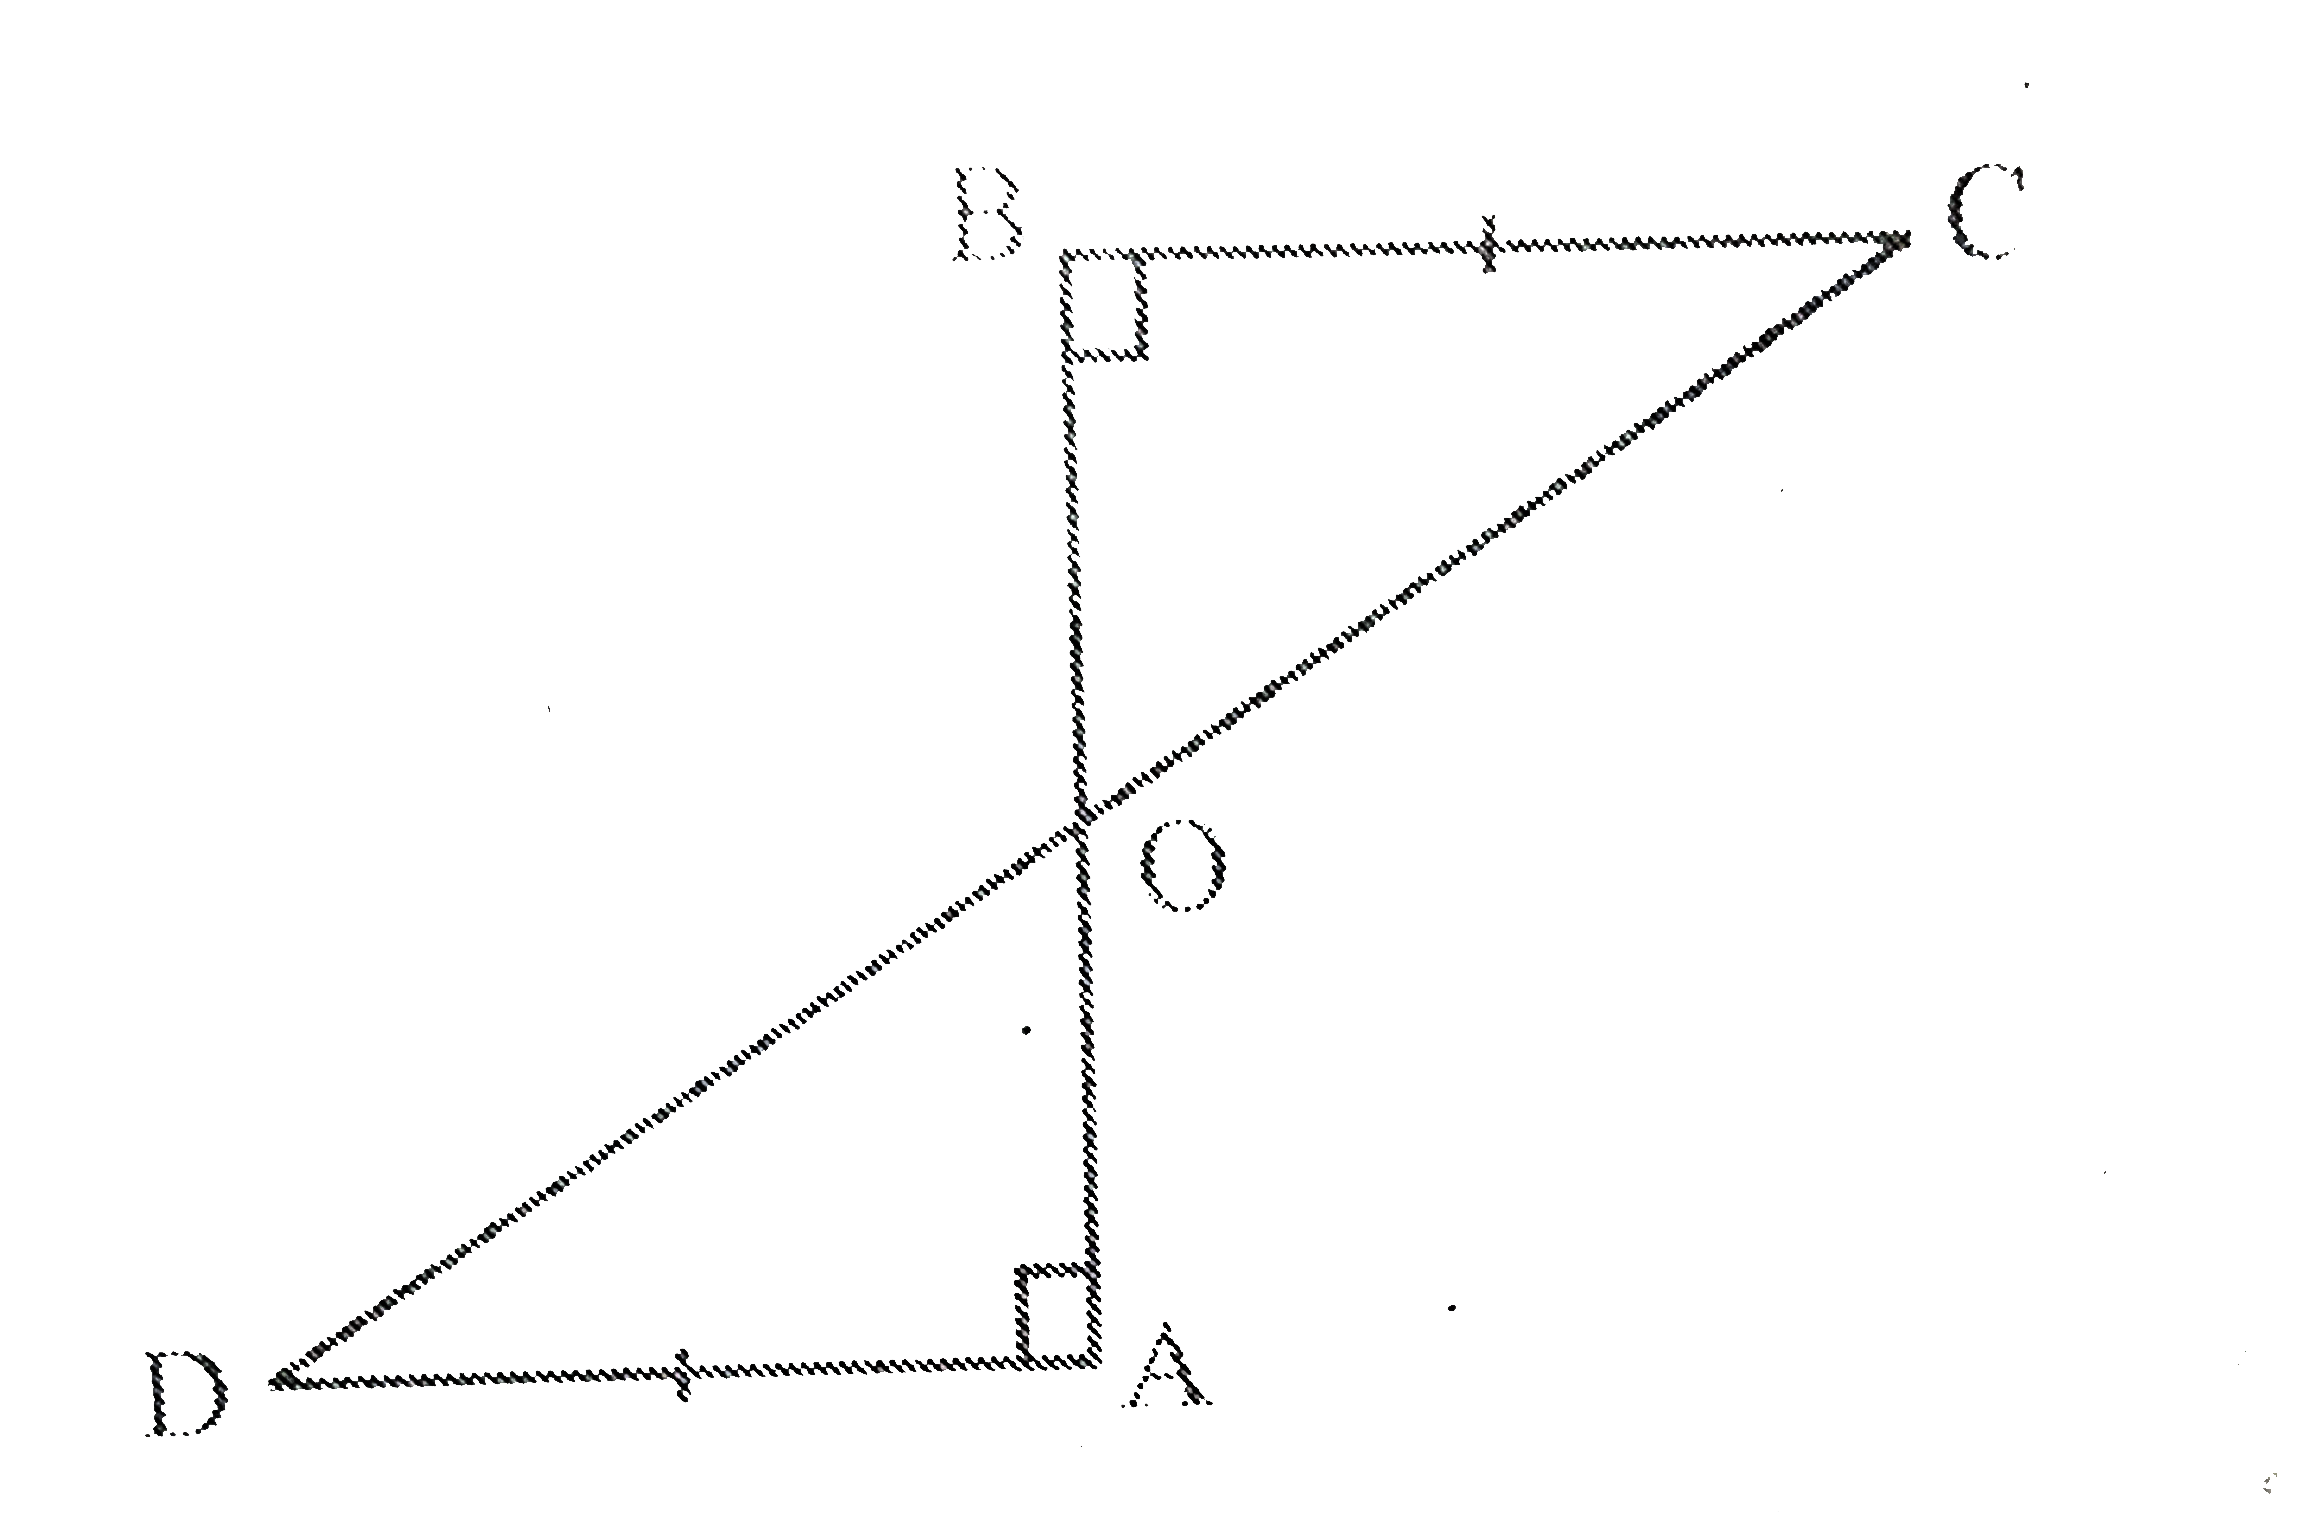 AD and BC are  equal perpendiculars to a line segment AB (see Fig. 7.18). Show that CD  bisects AB.